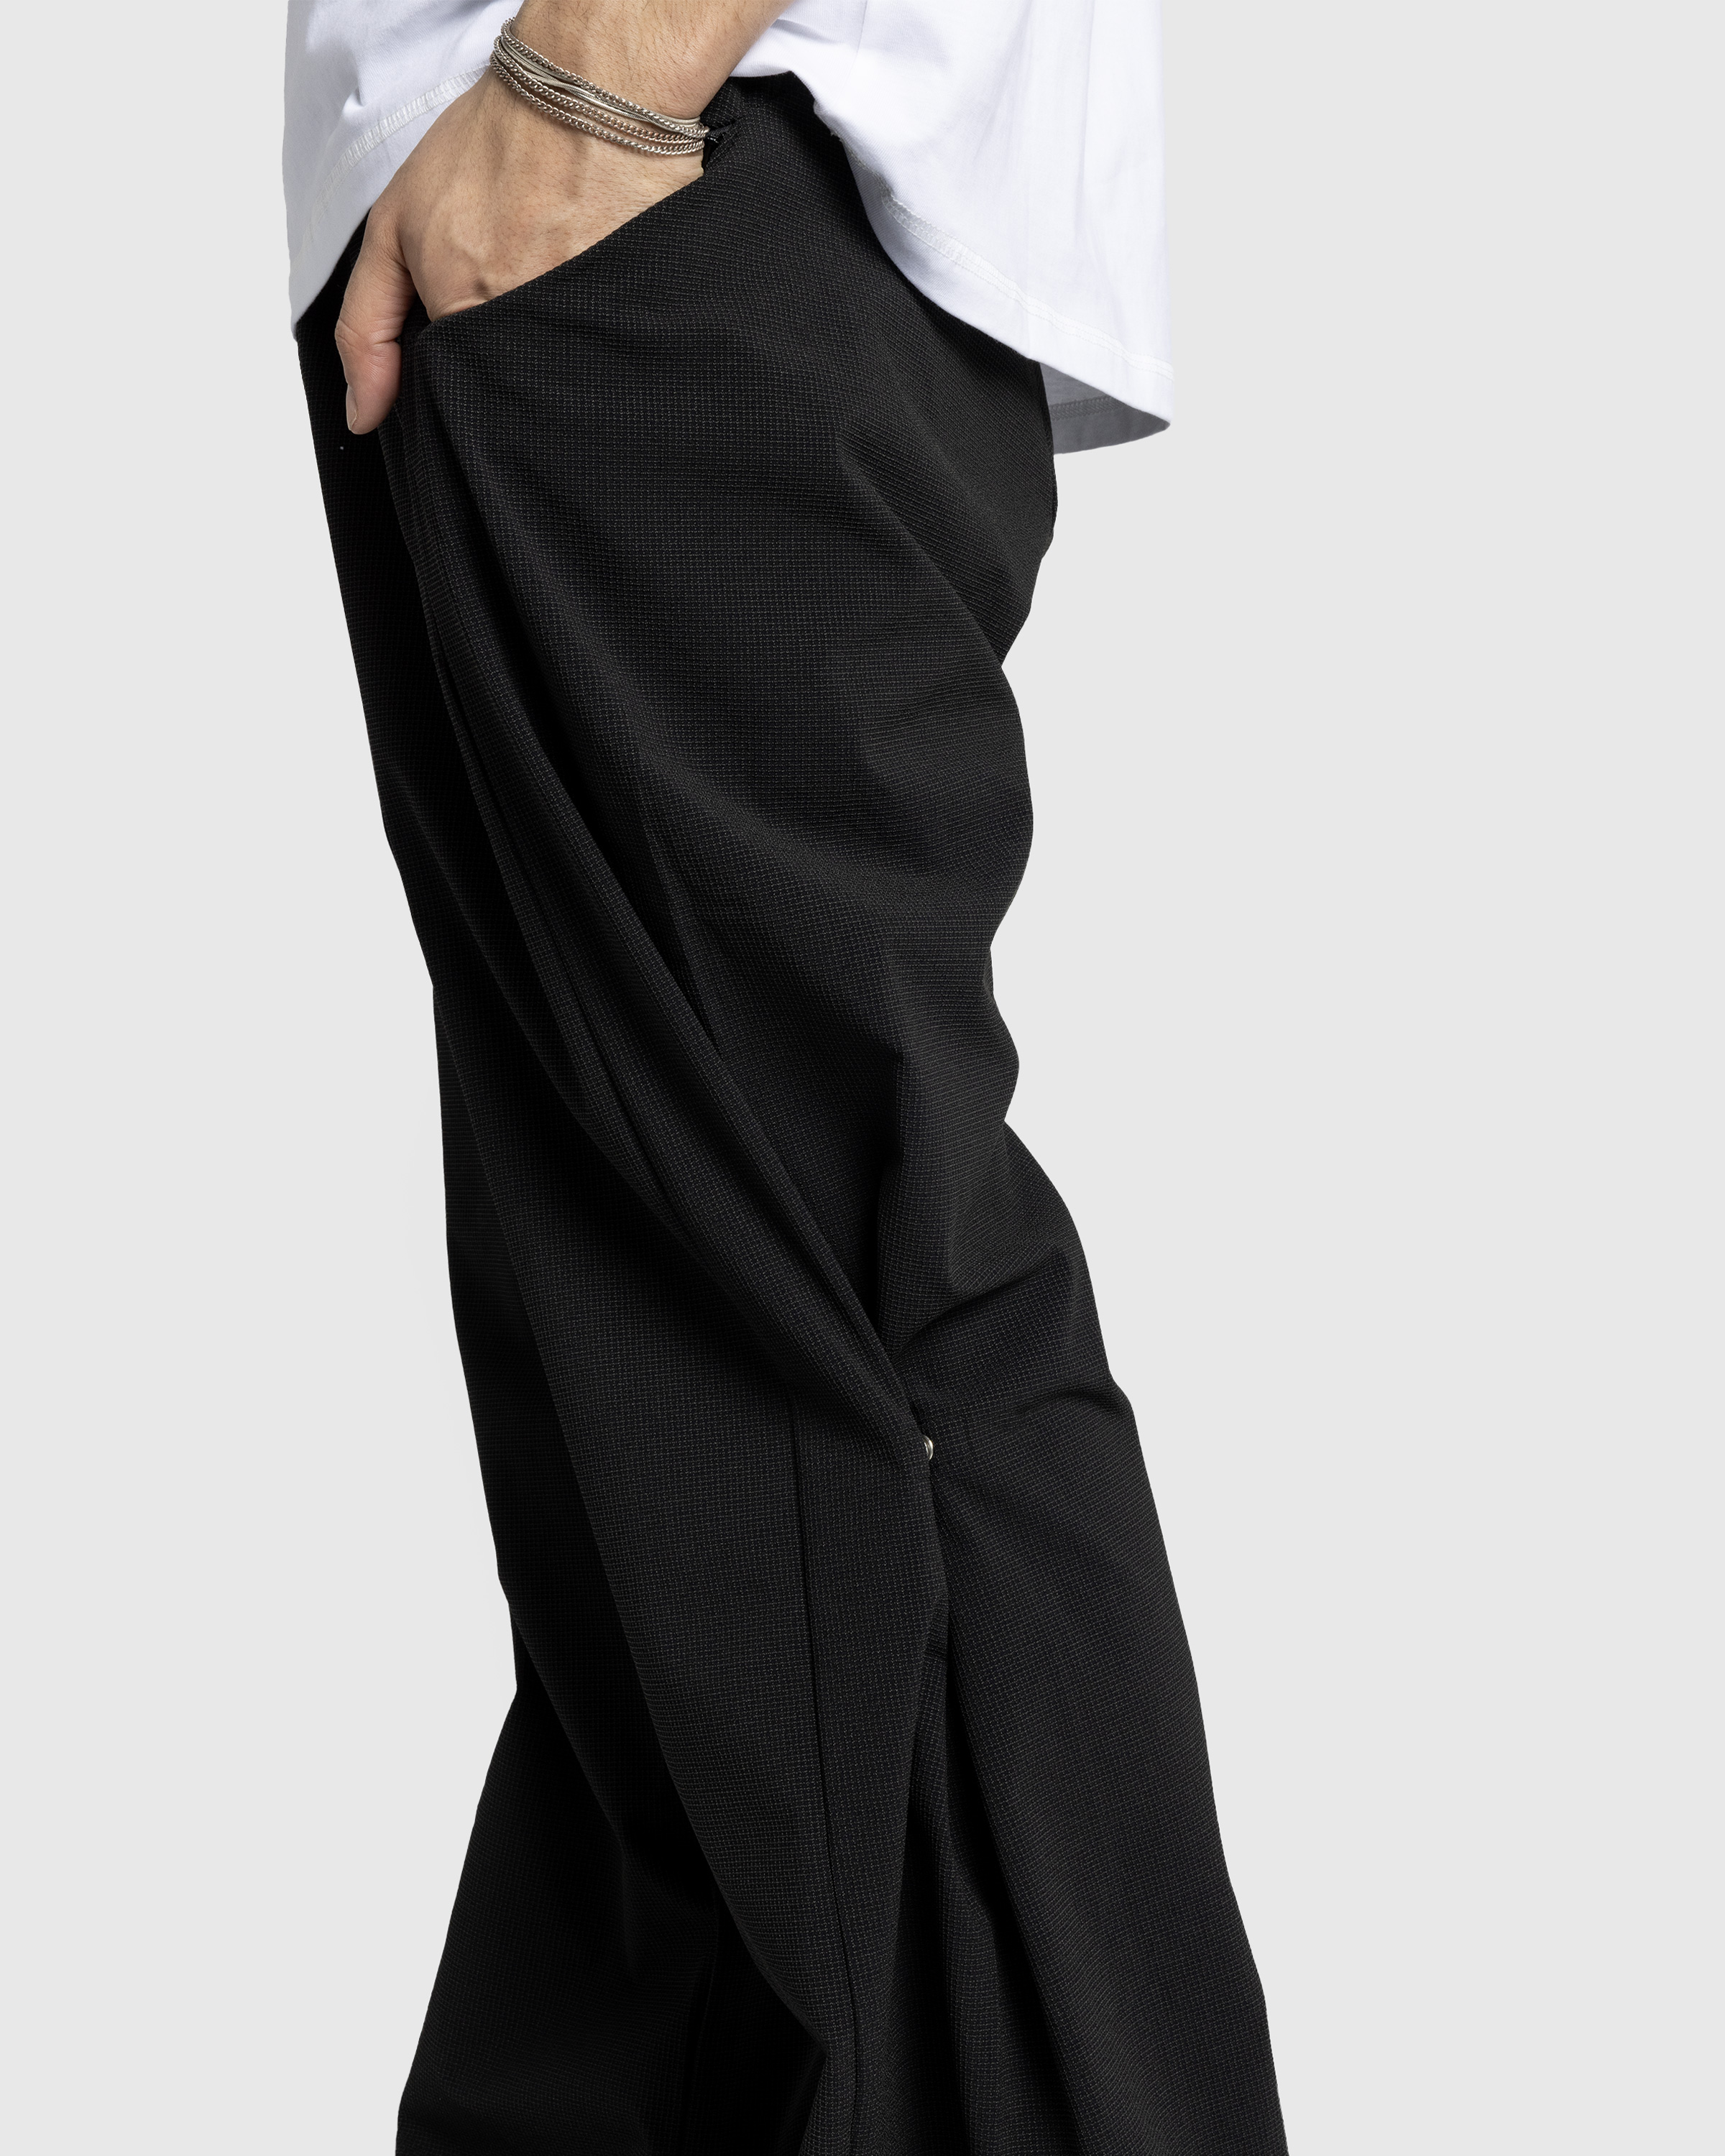 AFFXWRKS – Contract Pant Lead Black - Trousers - Black - Image 5